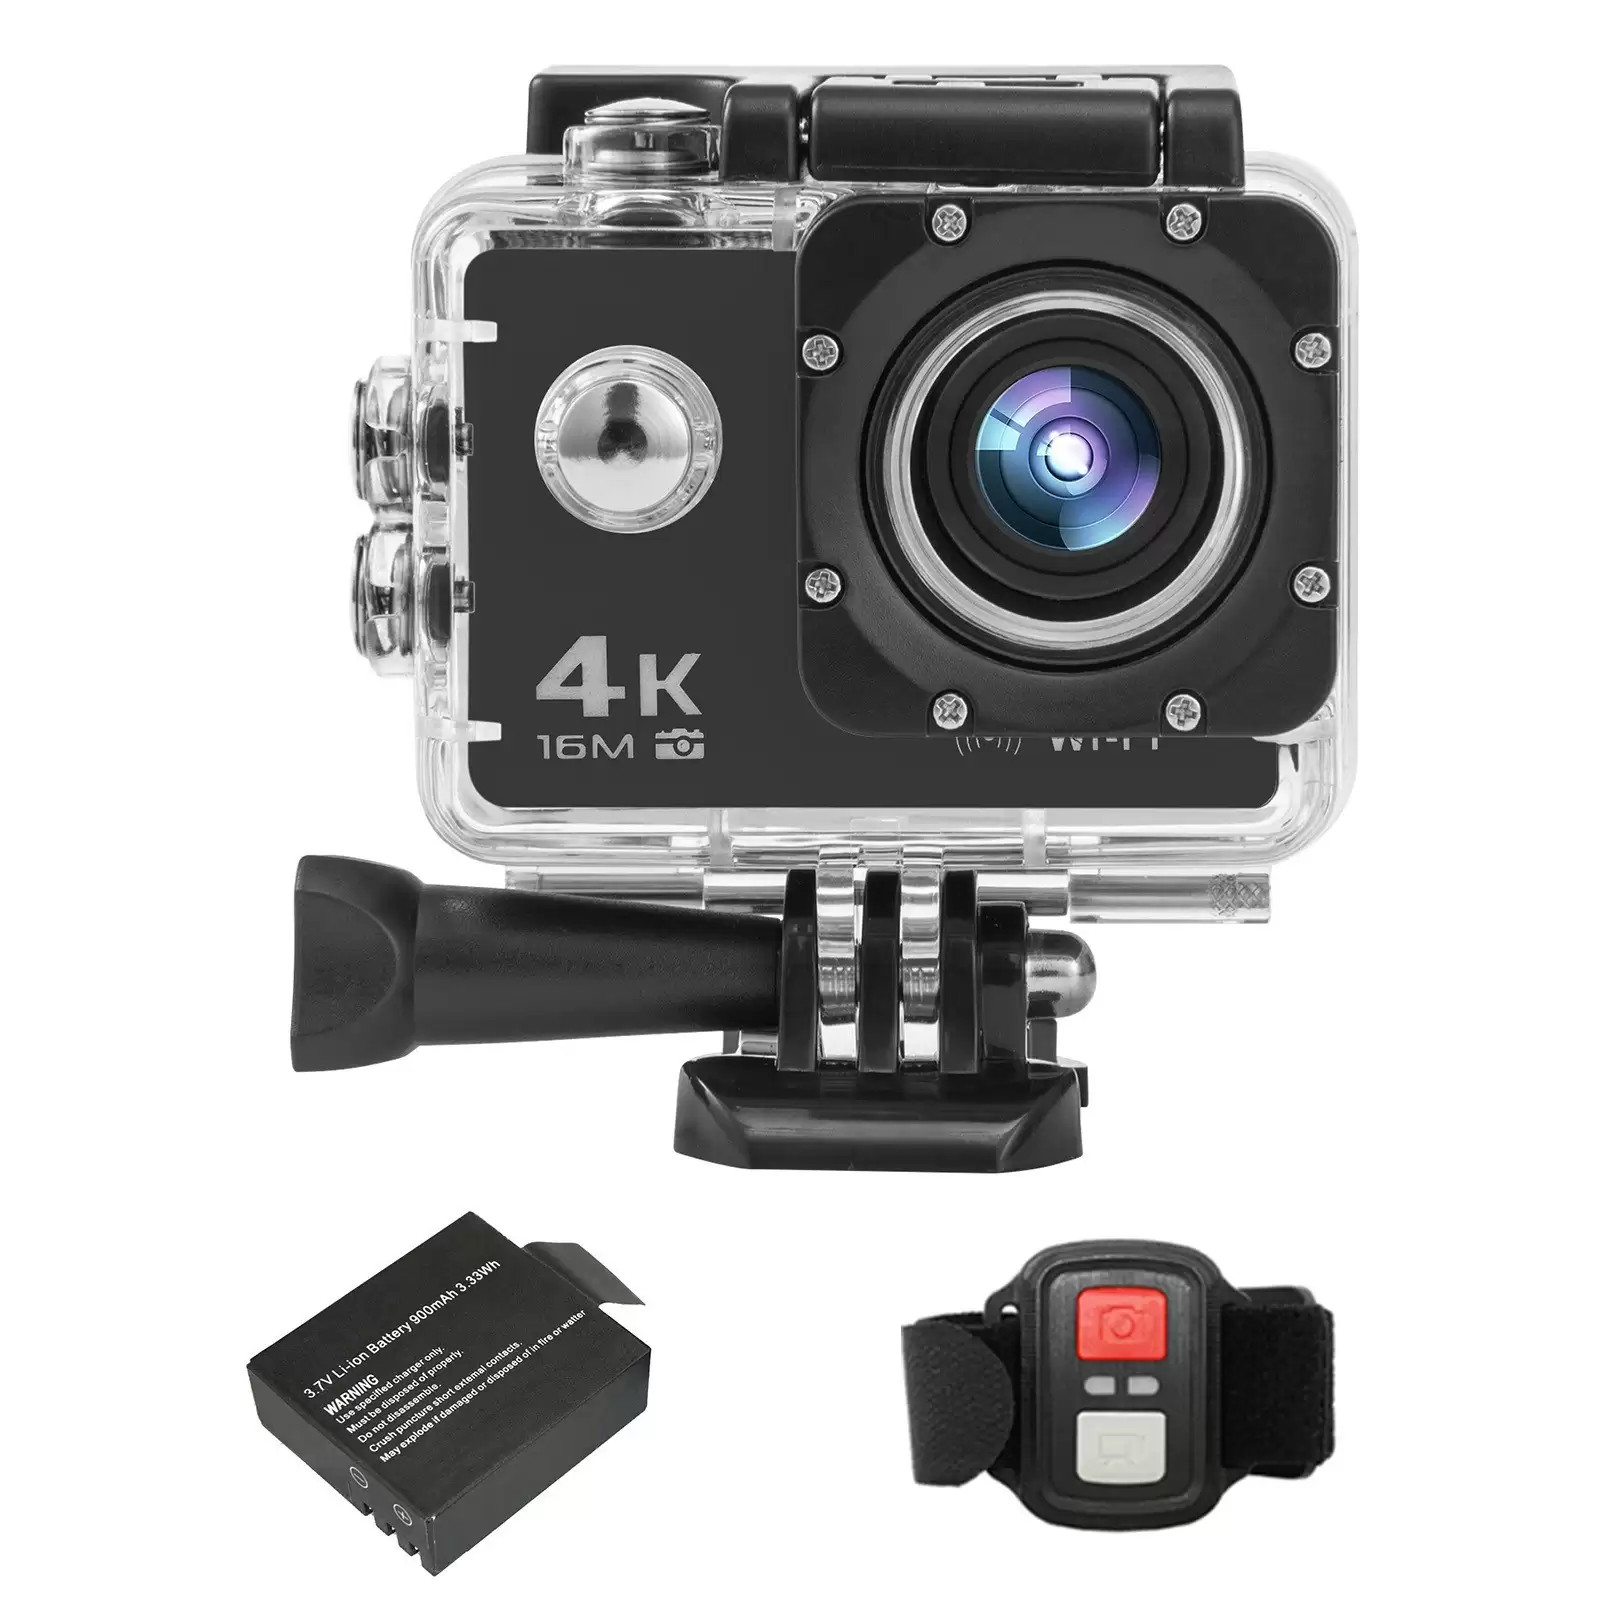 Get Extra 61% Discount On 4k/30fps 16mp Ultra Hd Sports Action Camera, Limited Offers $44.99 With This Discount Coupon At Tomtop